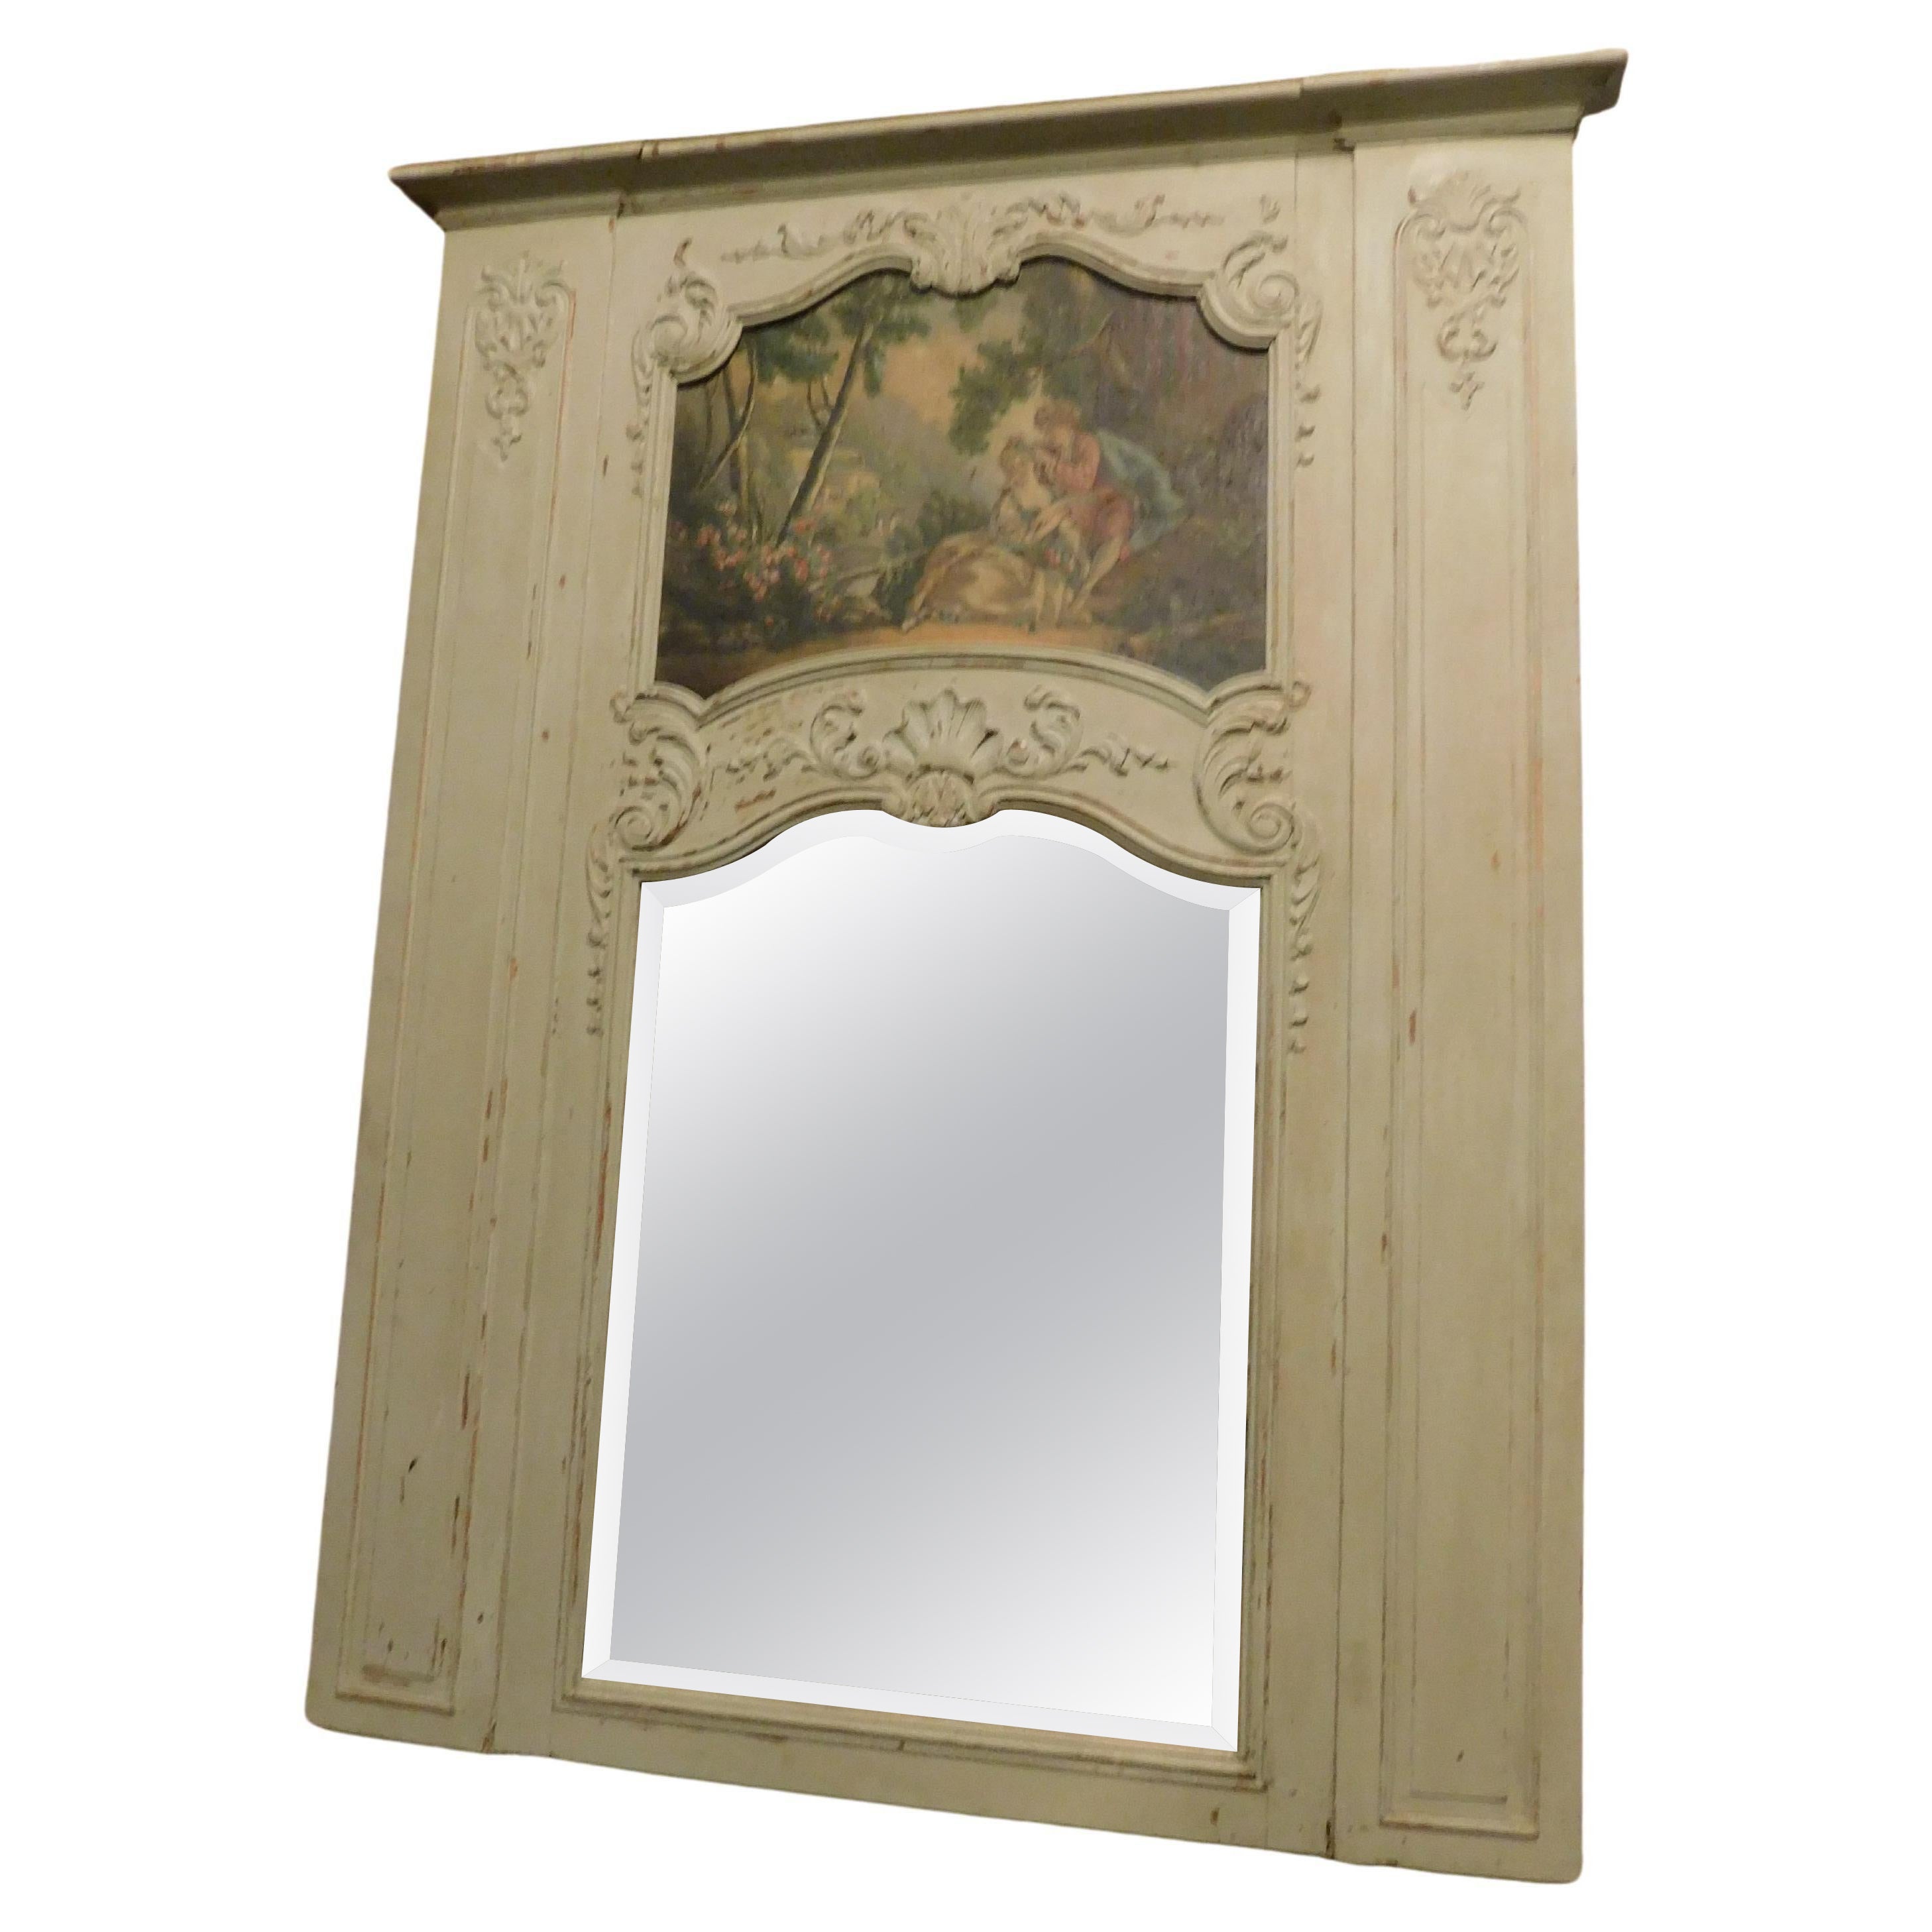 Antique Mirror for Fireplace, Lacquered, Carved and Painted, 19th Century France